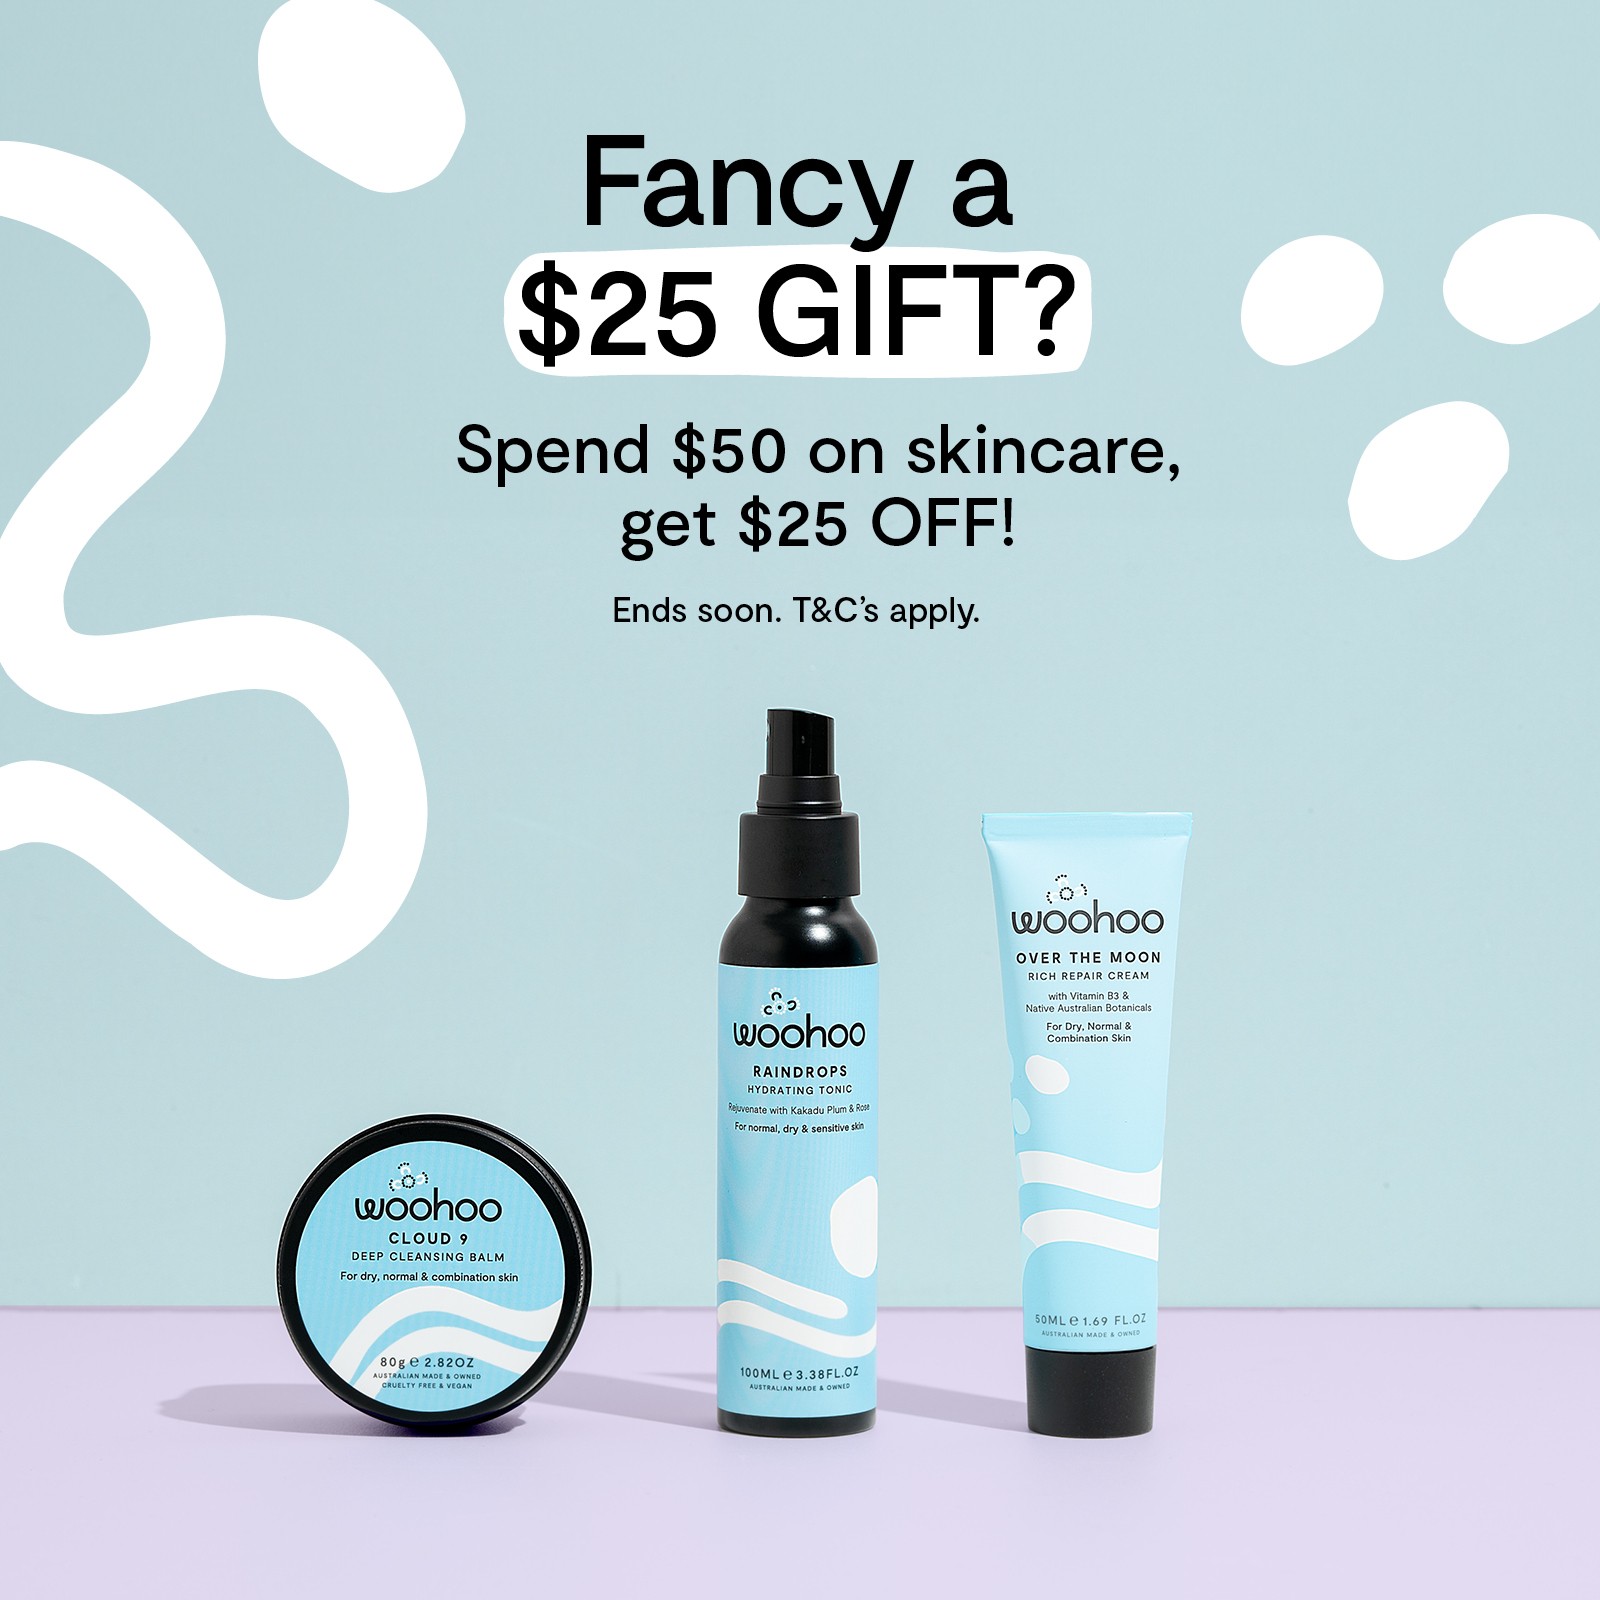 Your $25 skincare gift